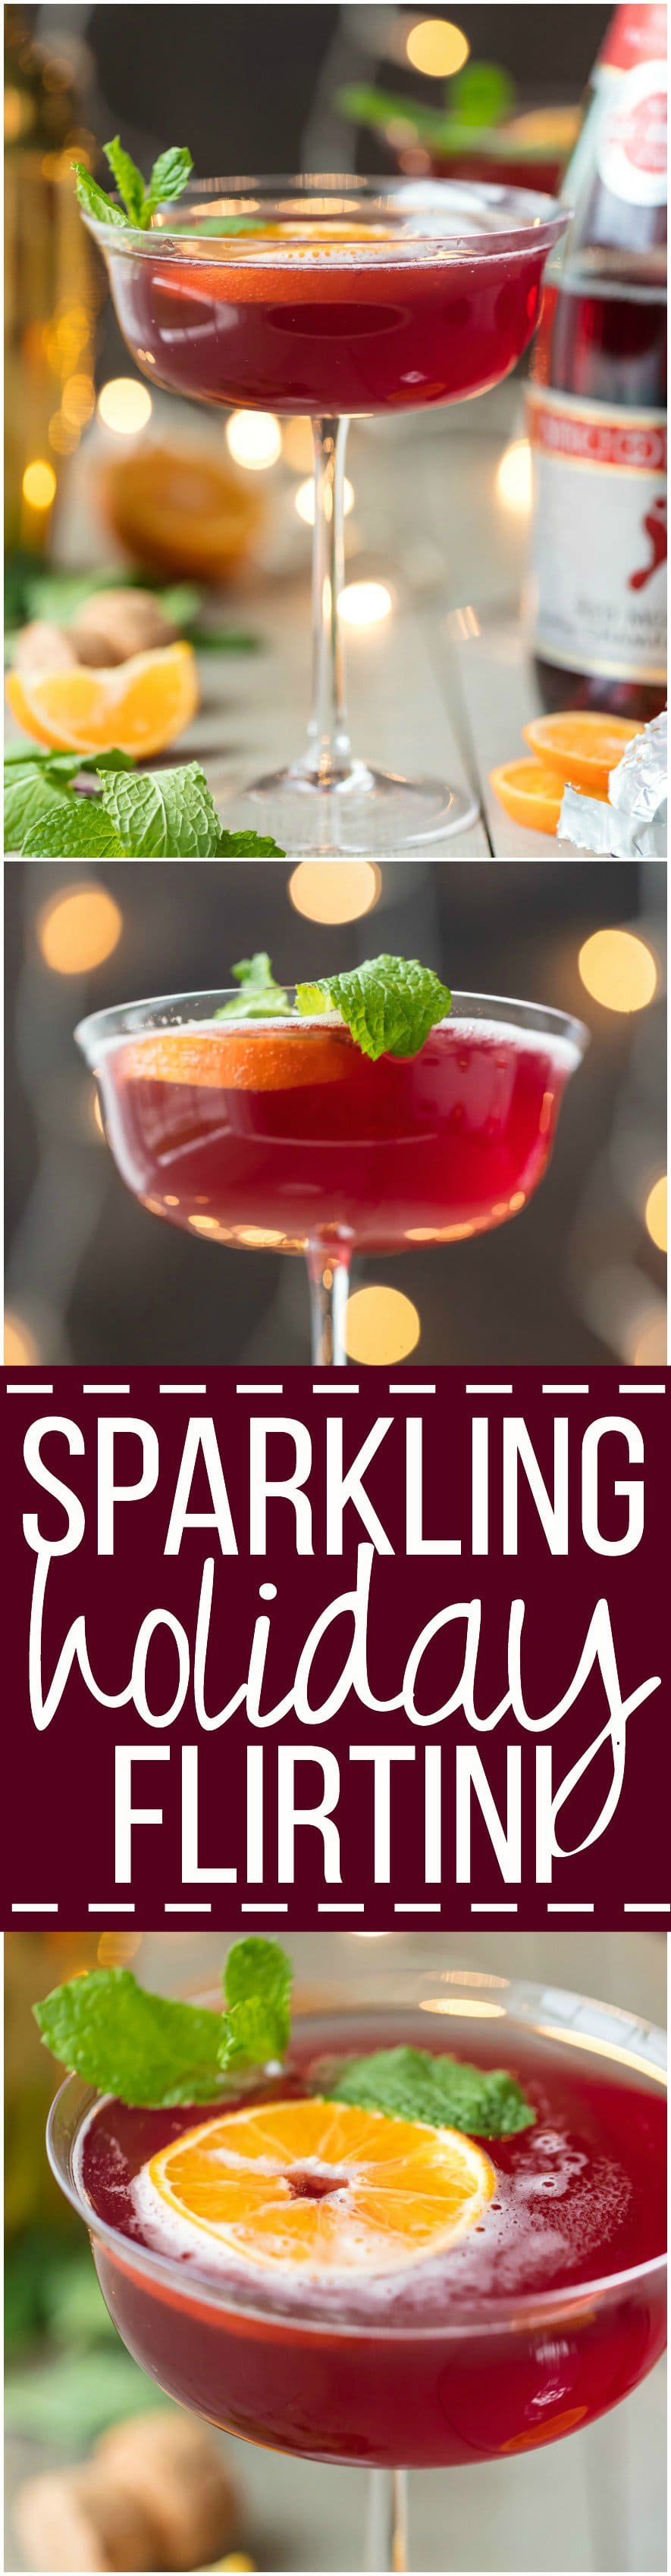 This SPARKLING HOLIDAY FLIRTINI is fun, pretty, and delicious! Cranberry and pineapple juice mixed with orange vodka and topped with red moscato champagne, what could be better or more festive for Christmas or New Years Eve!